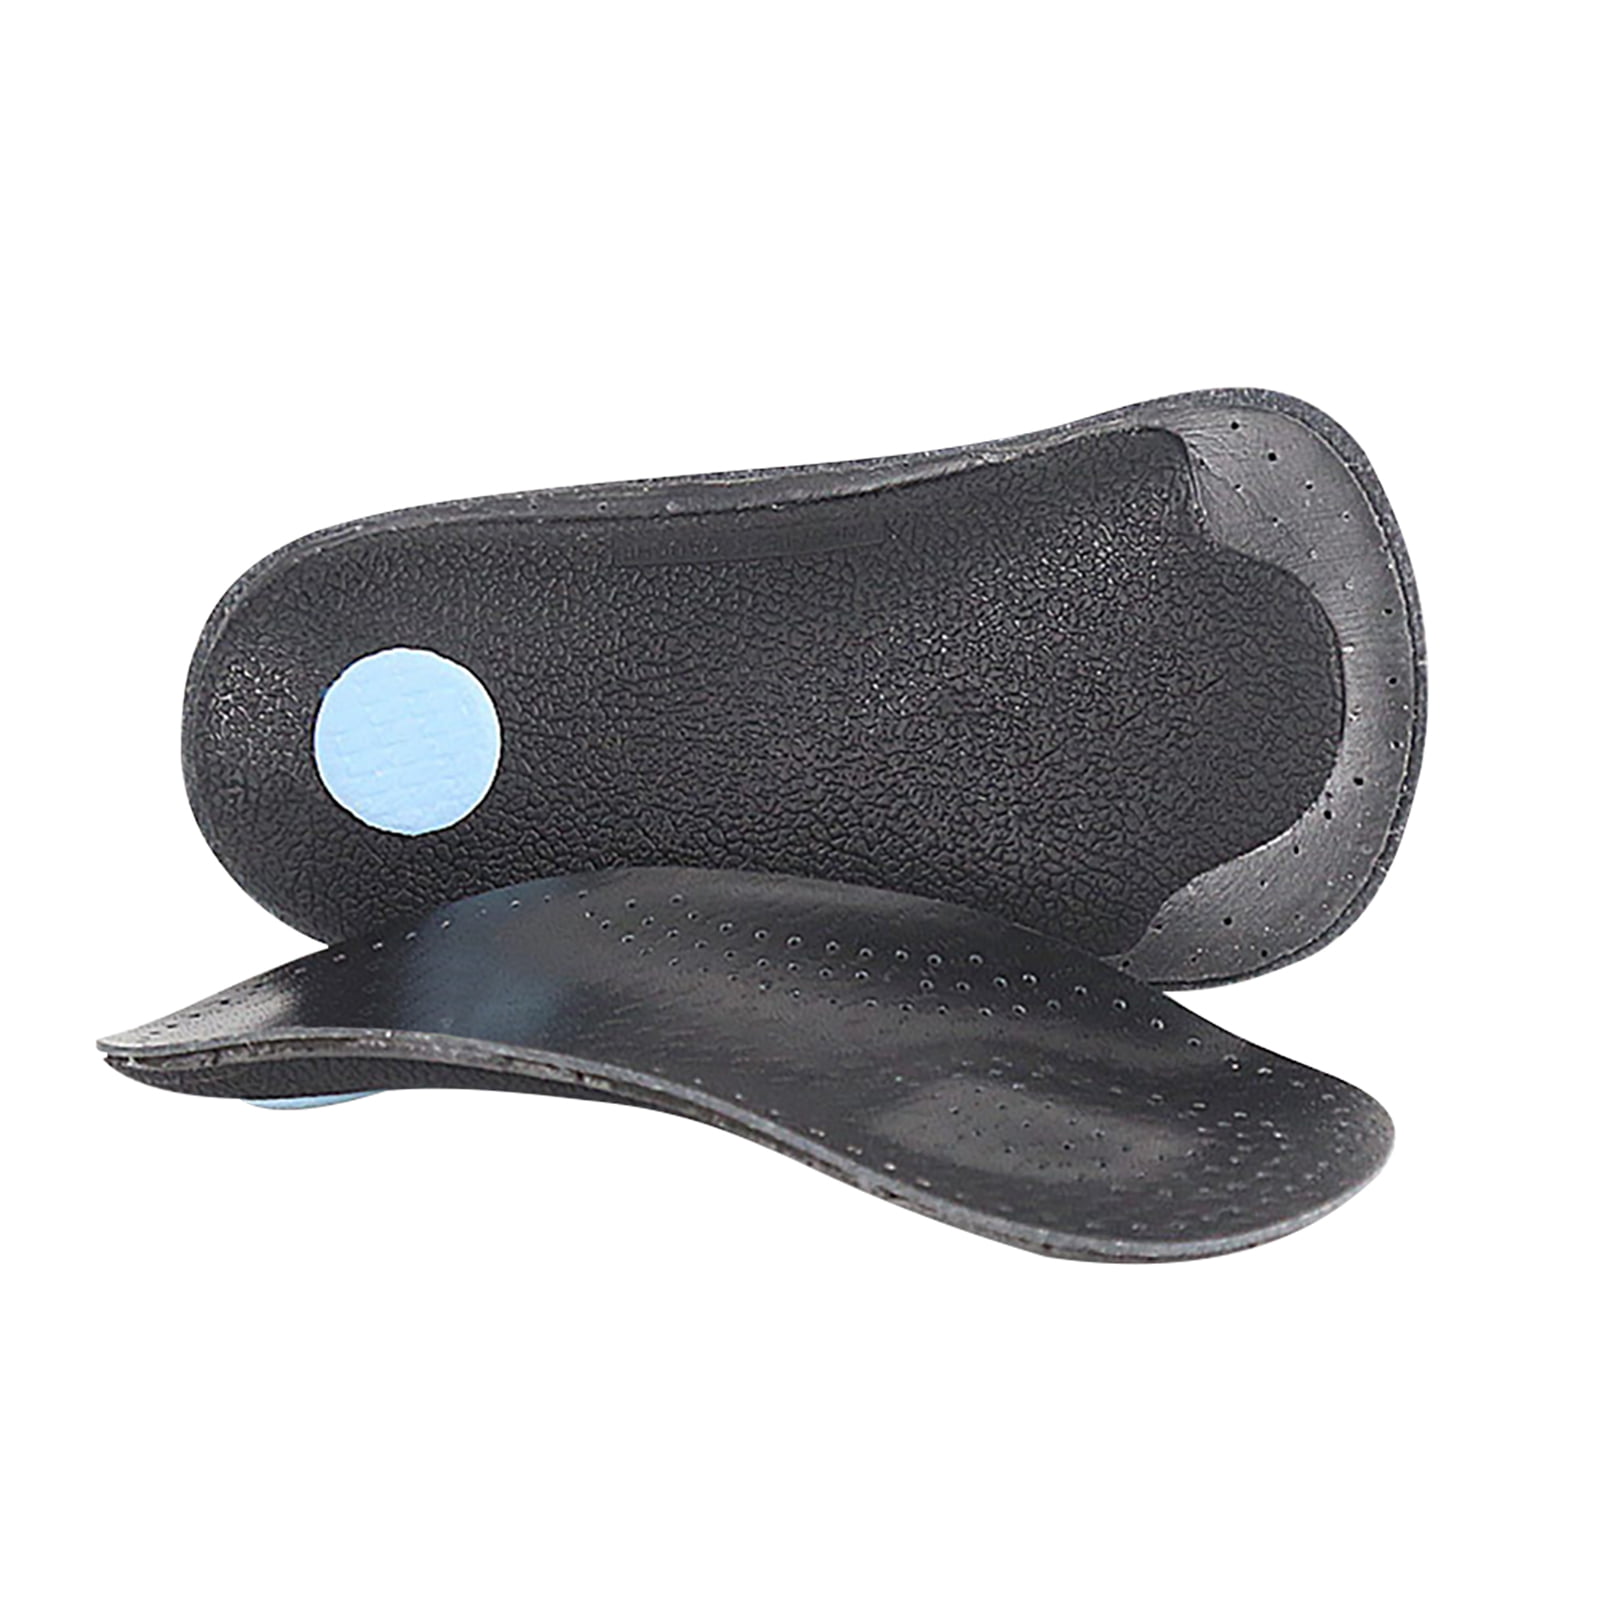 Details about   Sport Gel Insoles Orthotic Arch Foot Support Running Shoe Pad Inserts Cushions